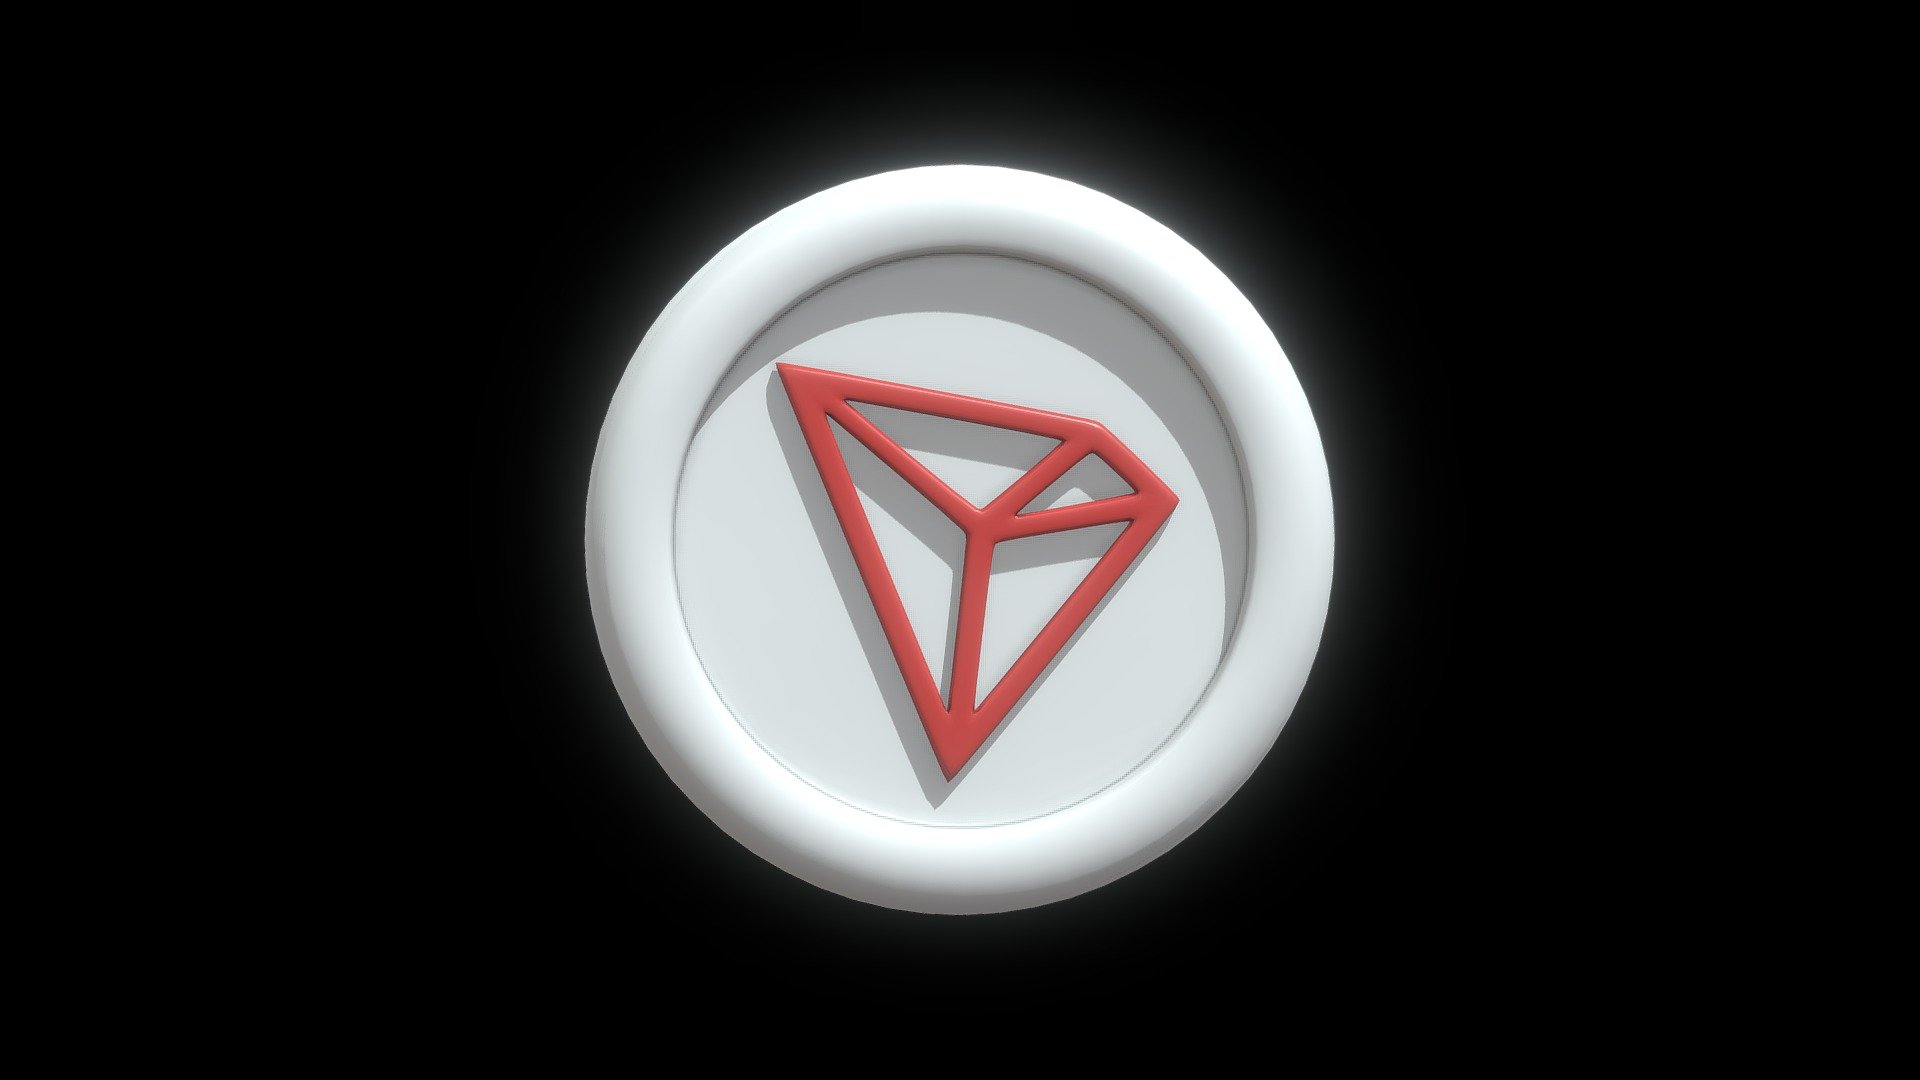 3D TRX or Tron silver coin with cartoon style Made in Blender 3.3.1

This model does include a TEXTURE, DIFFUSE and ROUGHNESS MAP, but if you want to change the color you can change it in the blend file, just use the principled bsdf and play with the rough and base color parameter 3d model